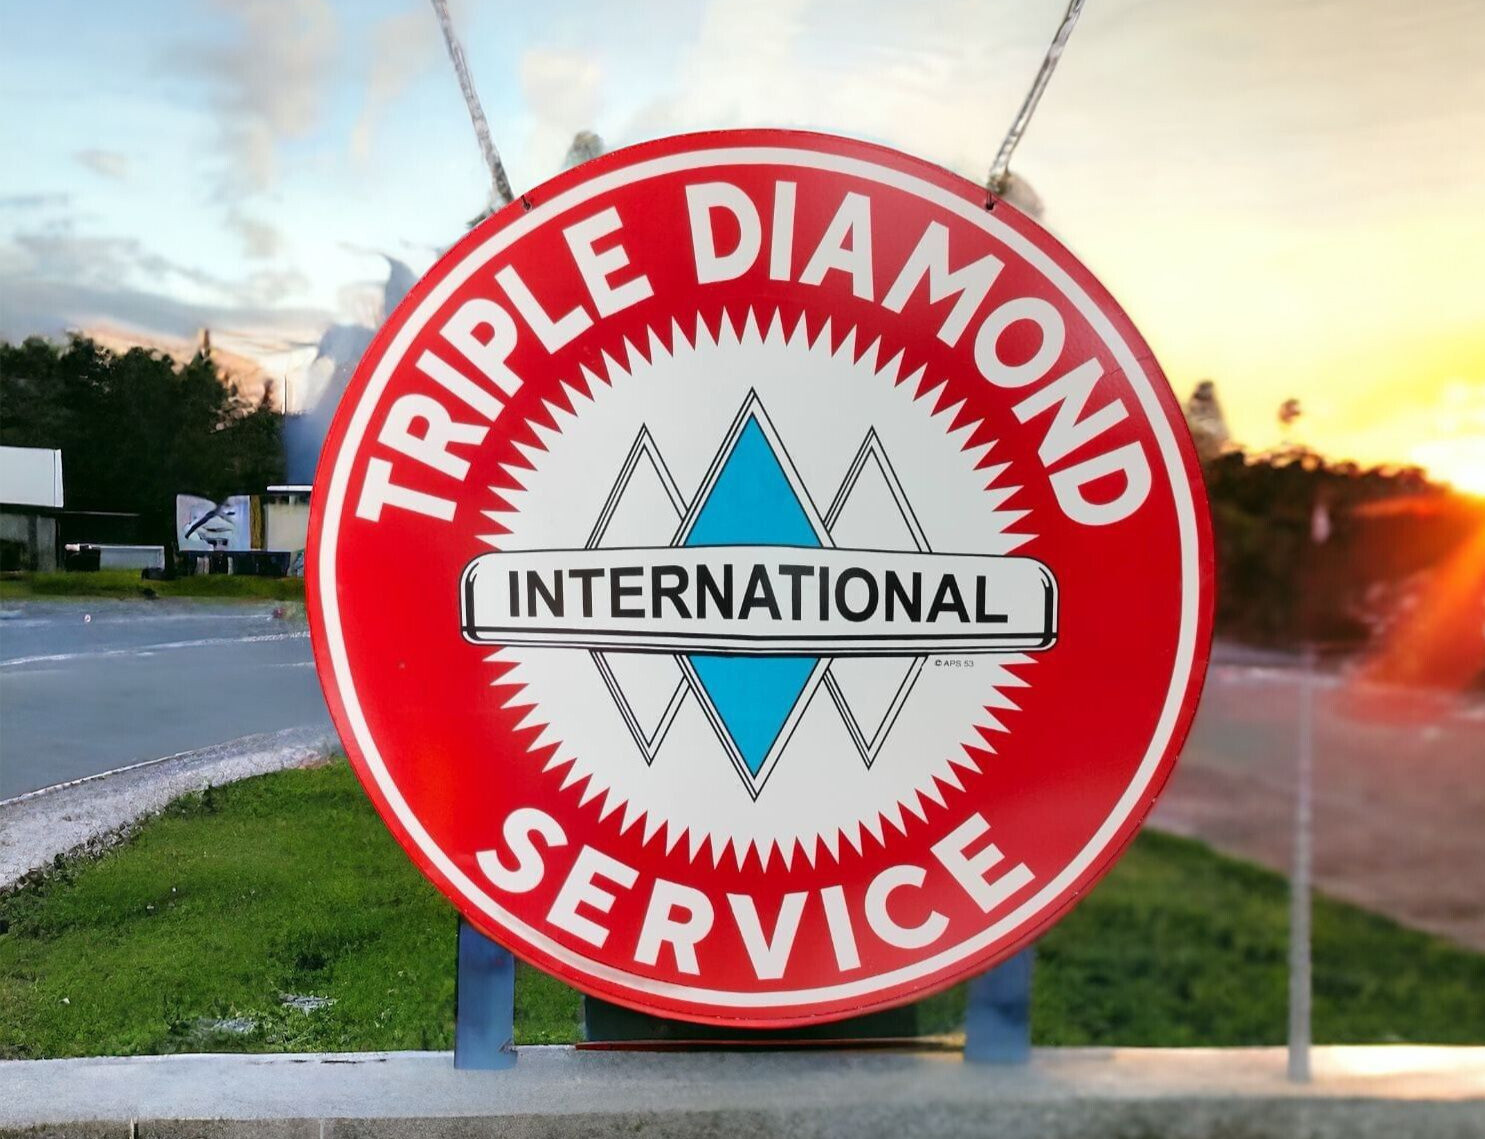 TRIPLE DIAMOND SERVICE   ENAMEL  SIGN  48 INCHES 4 FEET  DSP SIGN